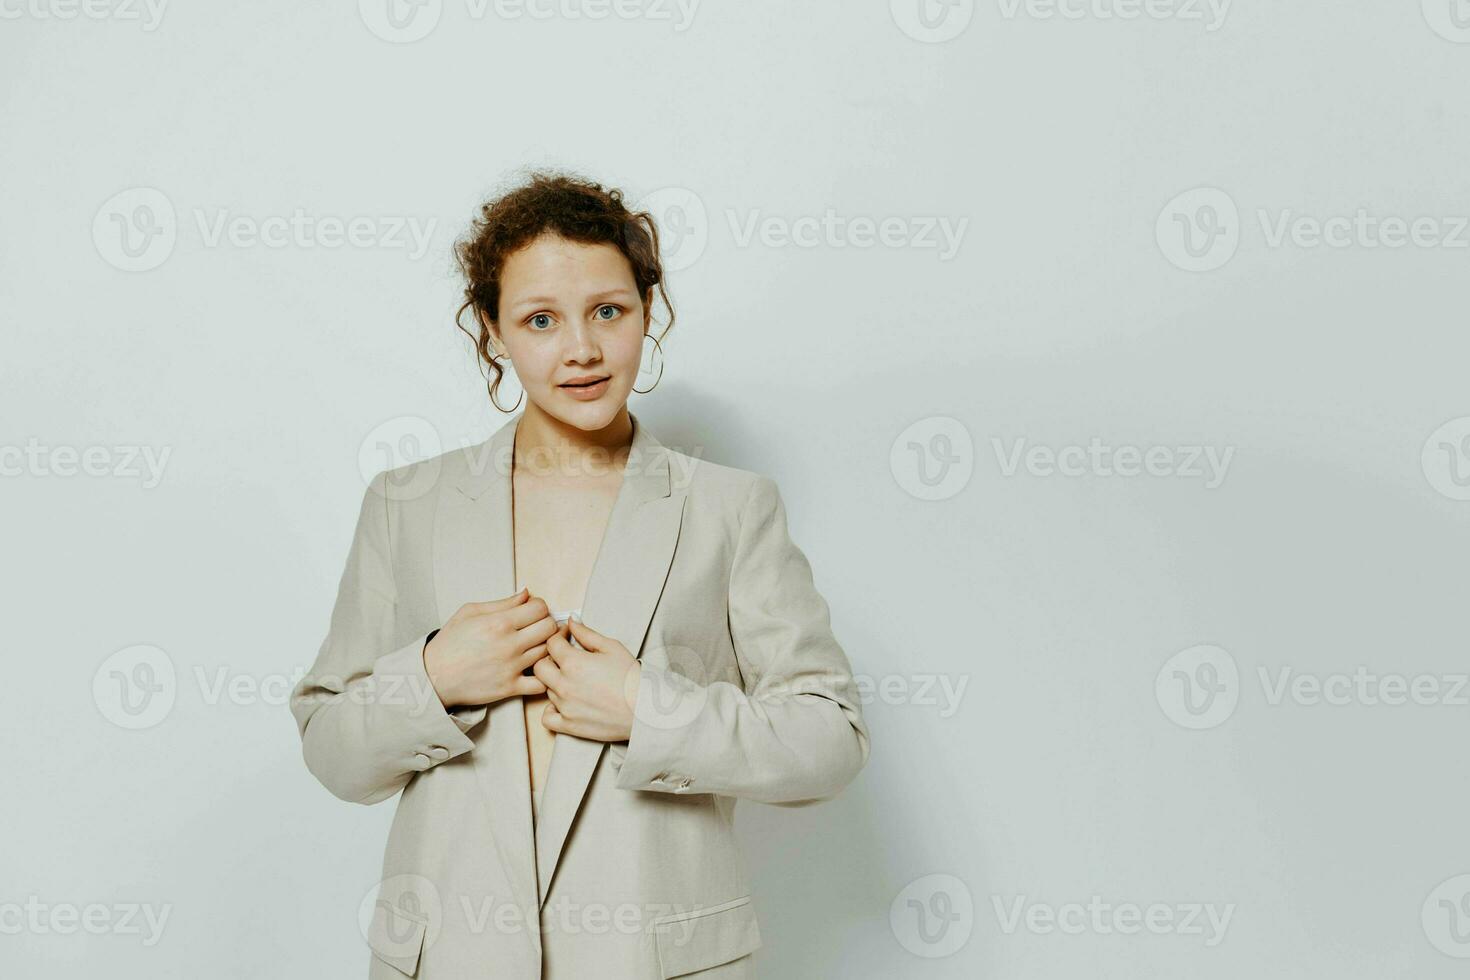 portrait of a young woman classic suit fashion posing fun light background unaltered photo